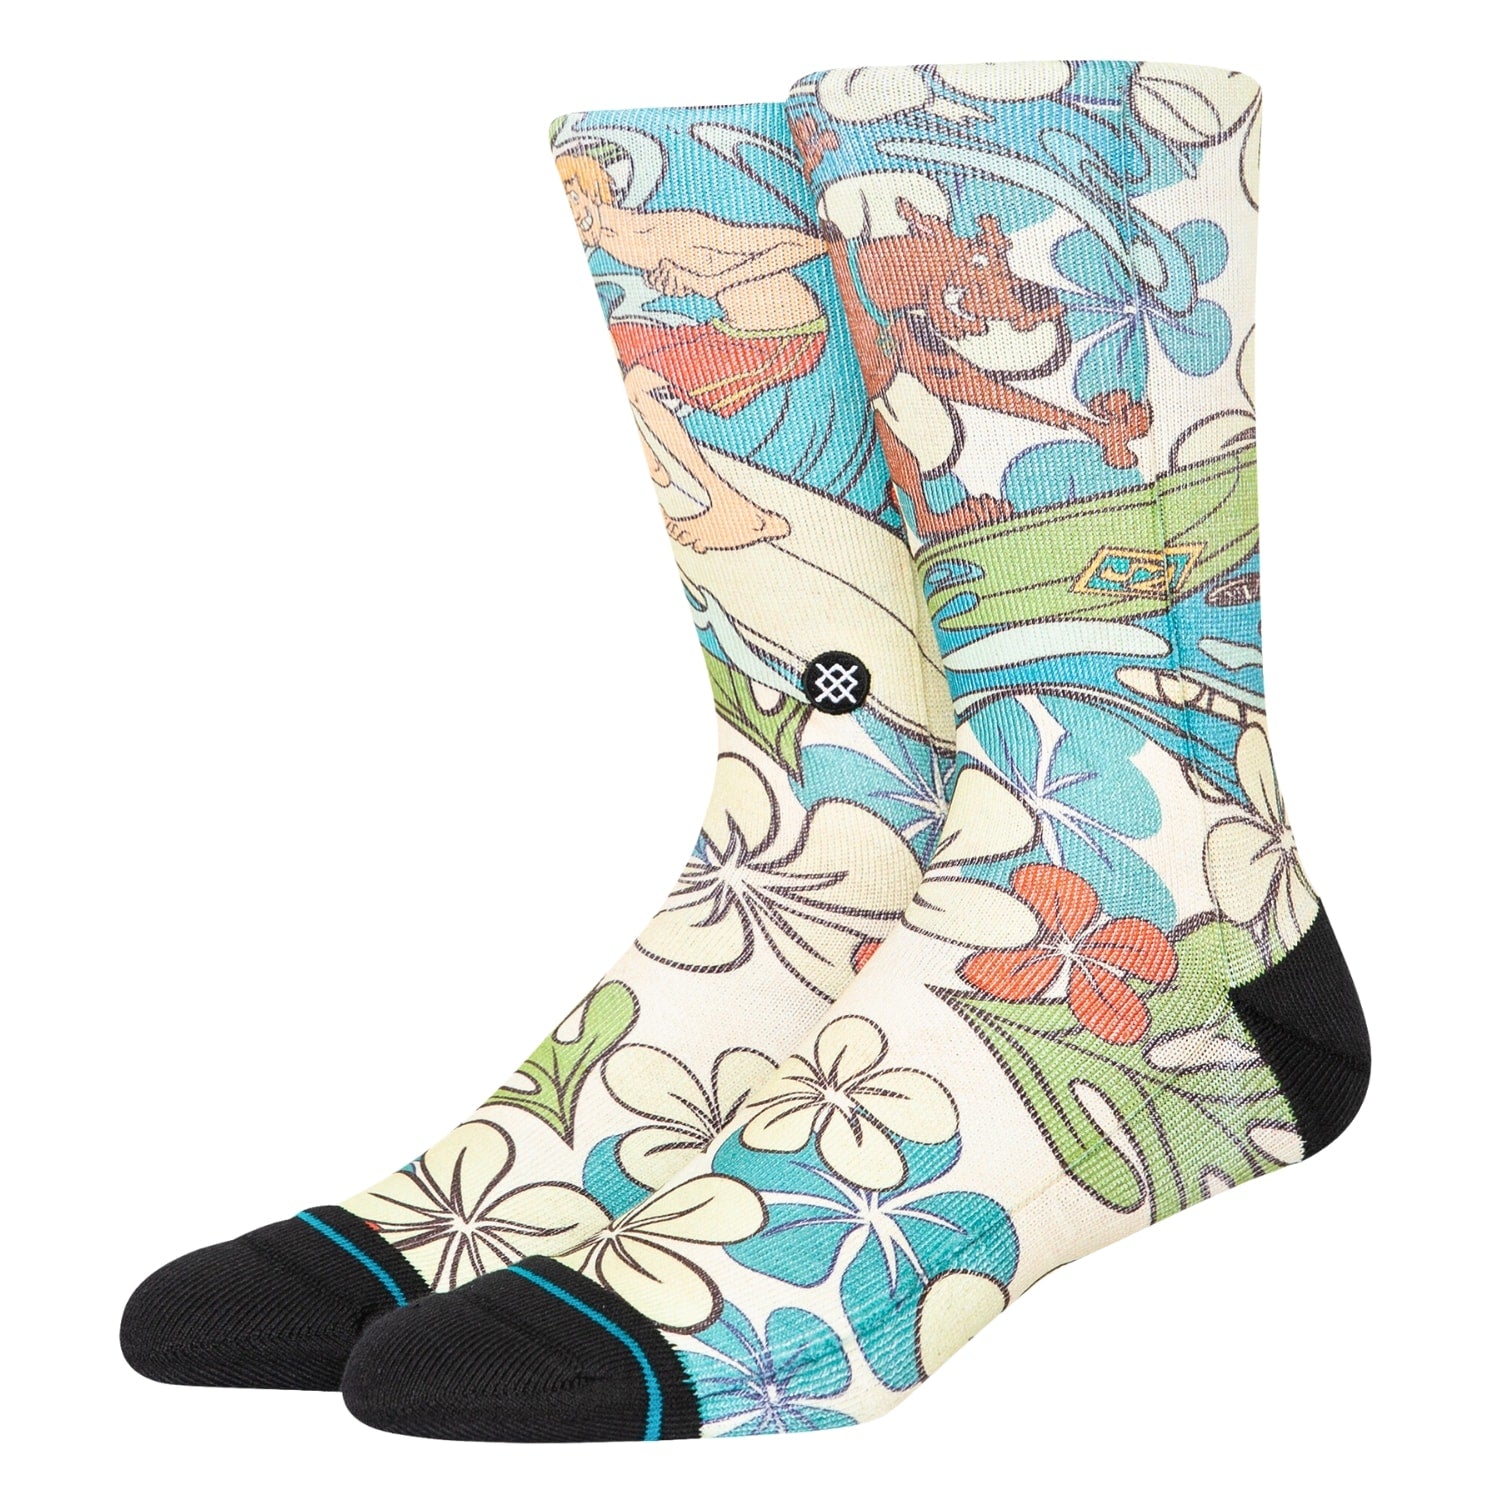 Stance X Scooby Doo Surfs Up Shaggy Socks - Blue - Unisex Crew Length Socks by Stance